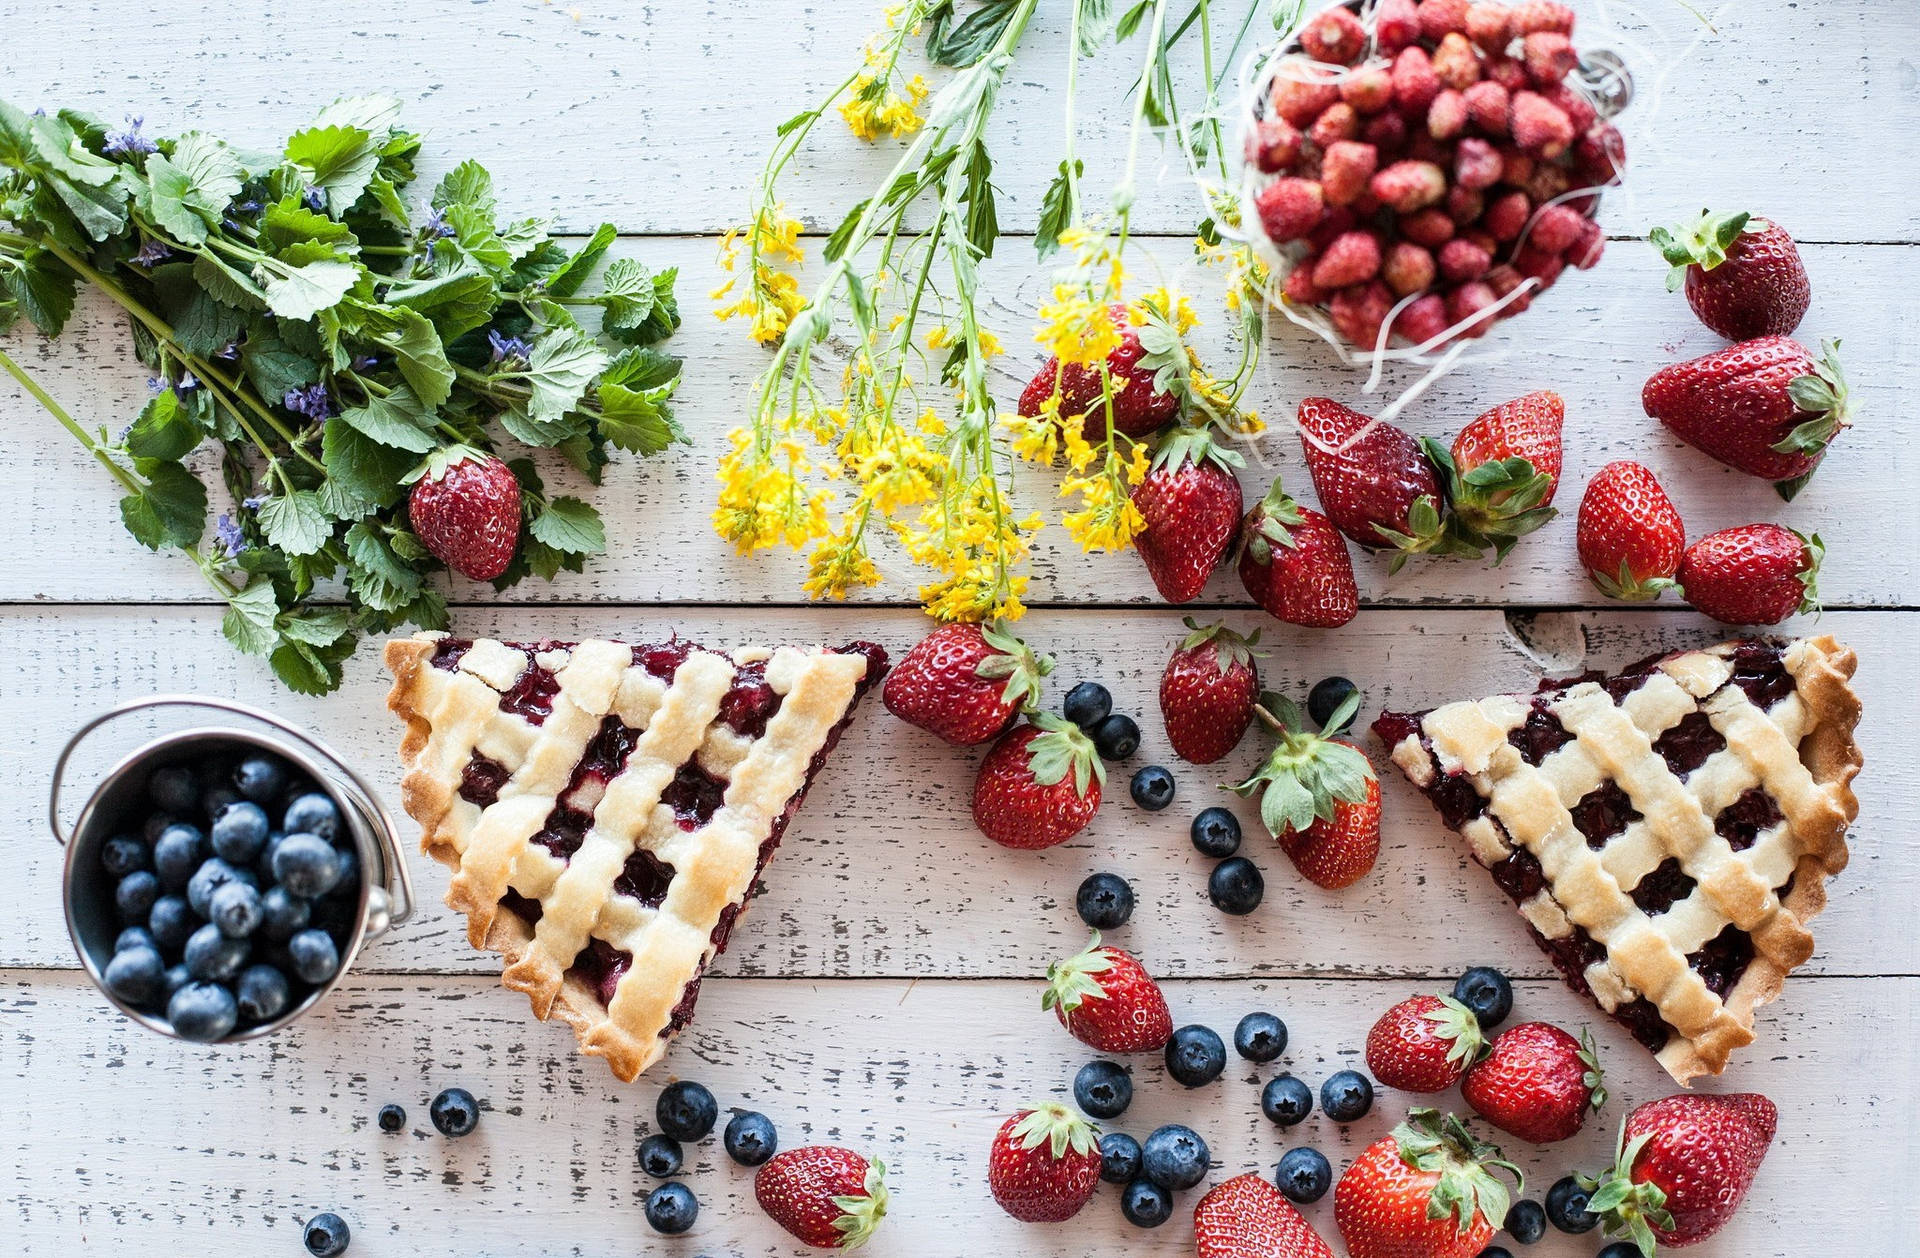 Pies And Berries